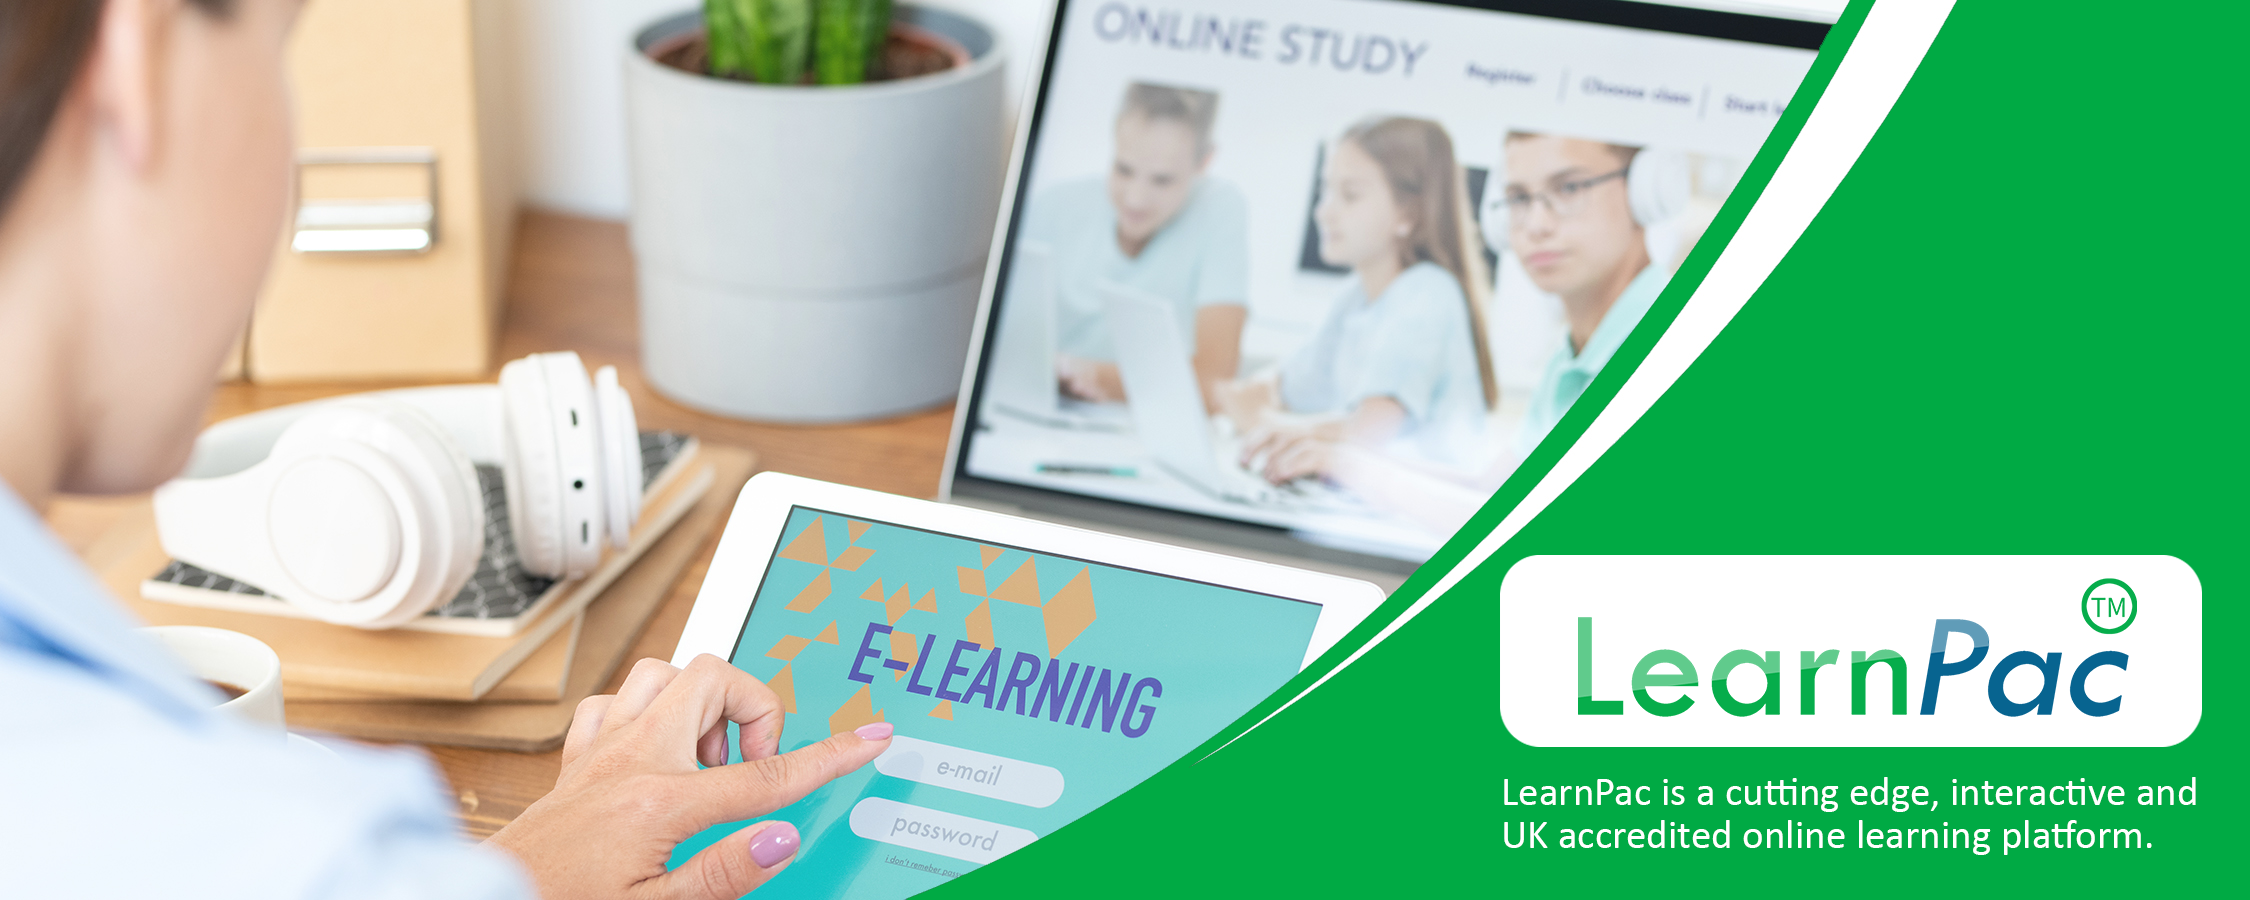 Developing Professional Skills - eLearning Course - CPD Certified - LearnPac Systems UK -